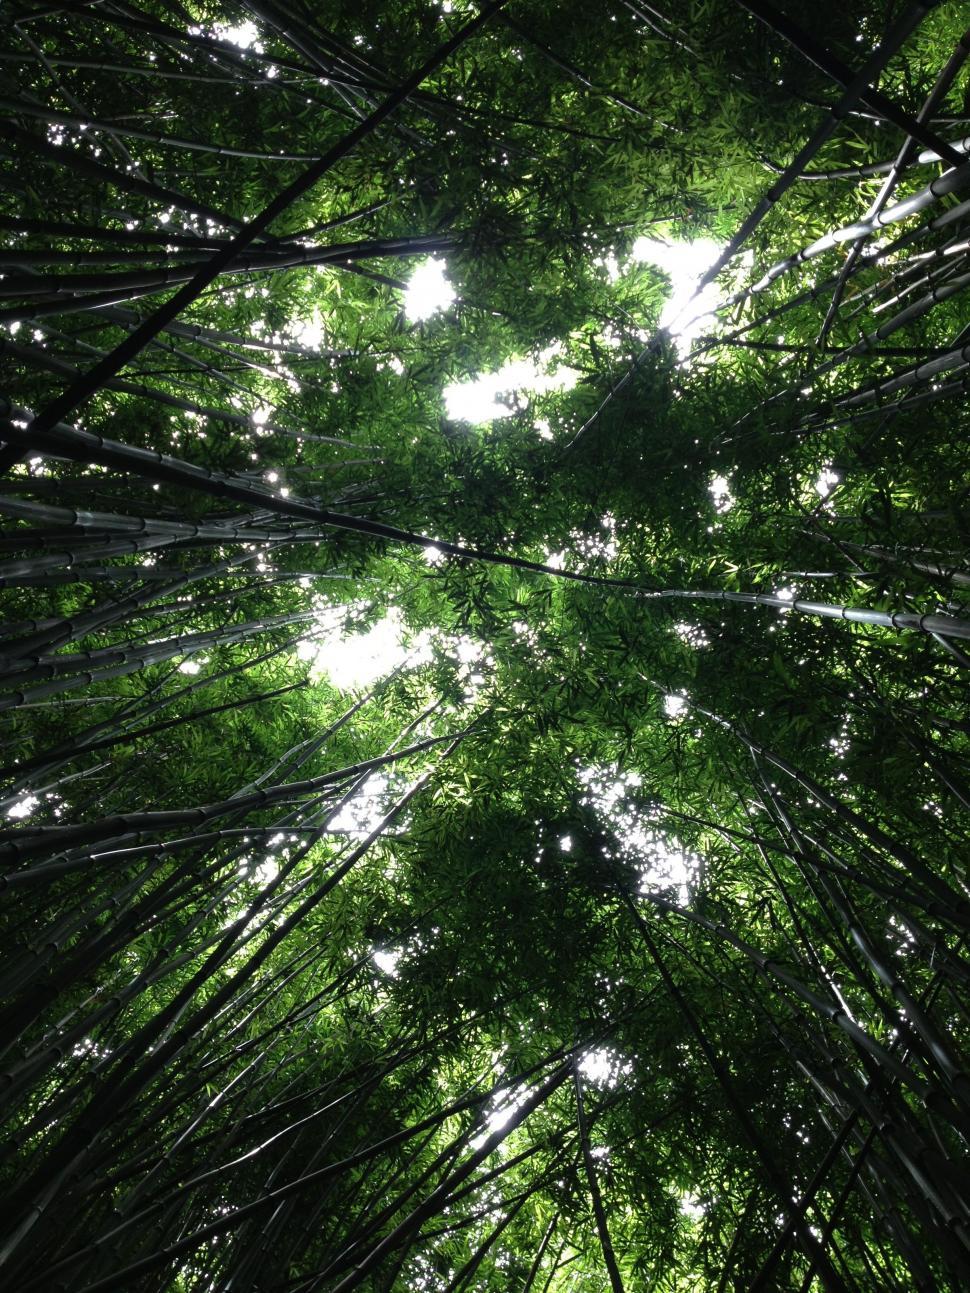 Free Image of Gazing Up Into the Canopy of a Bamboo Forest 